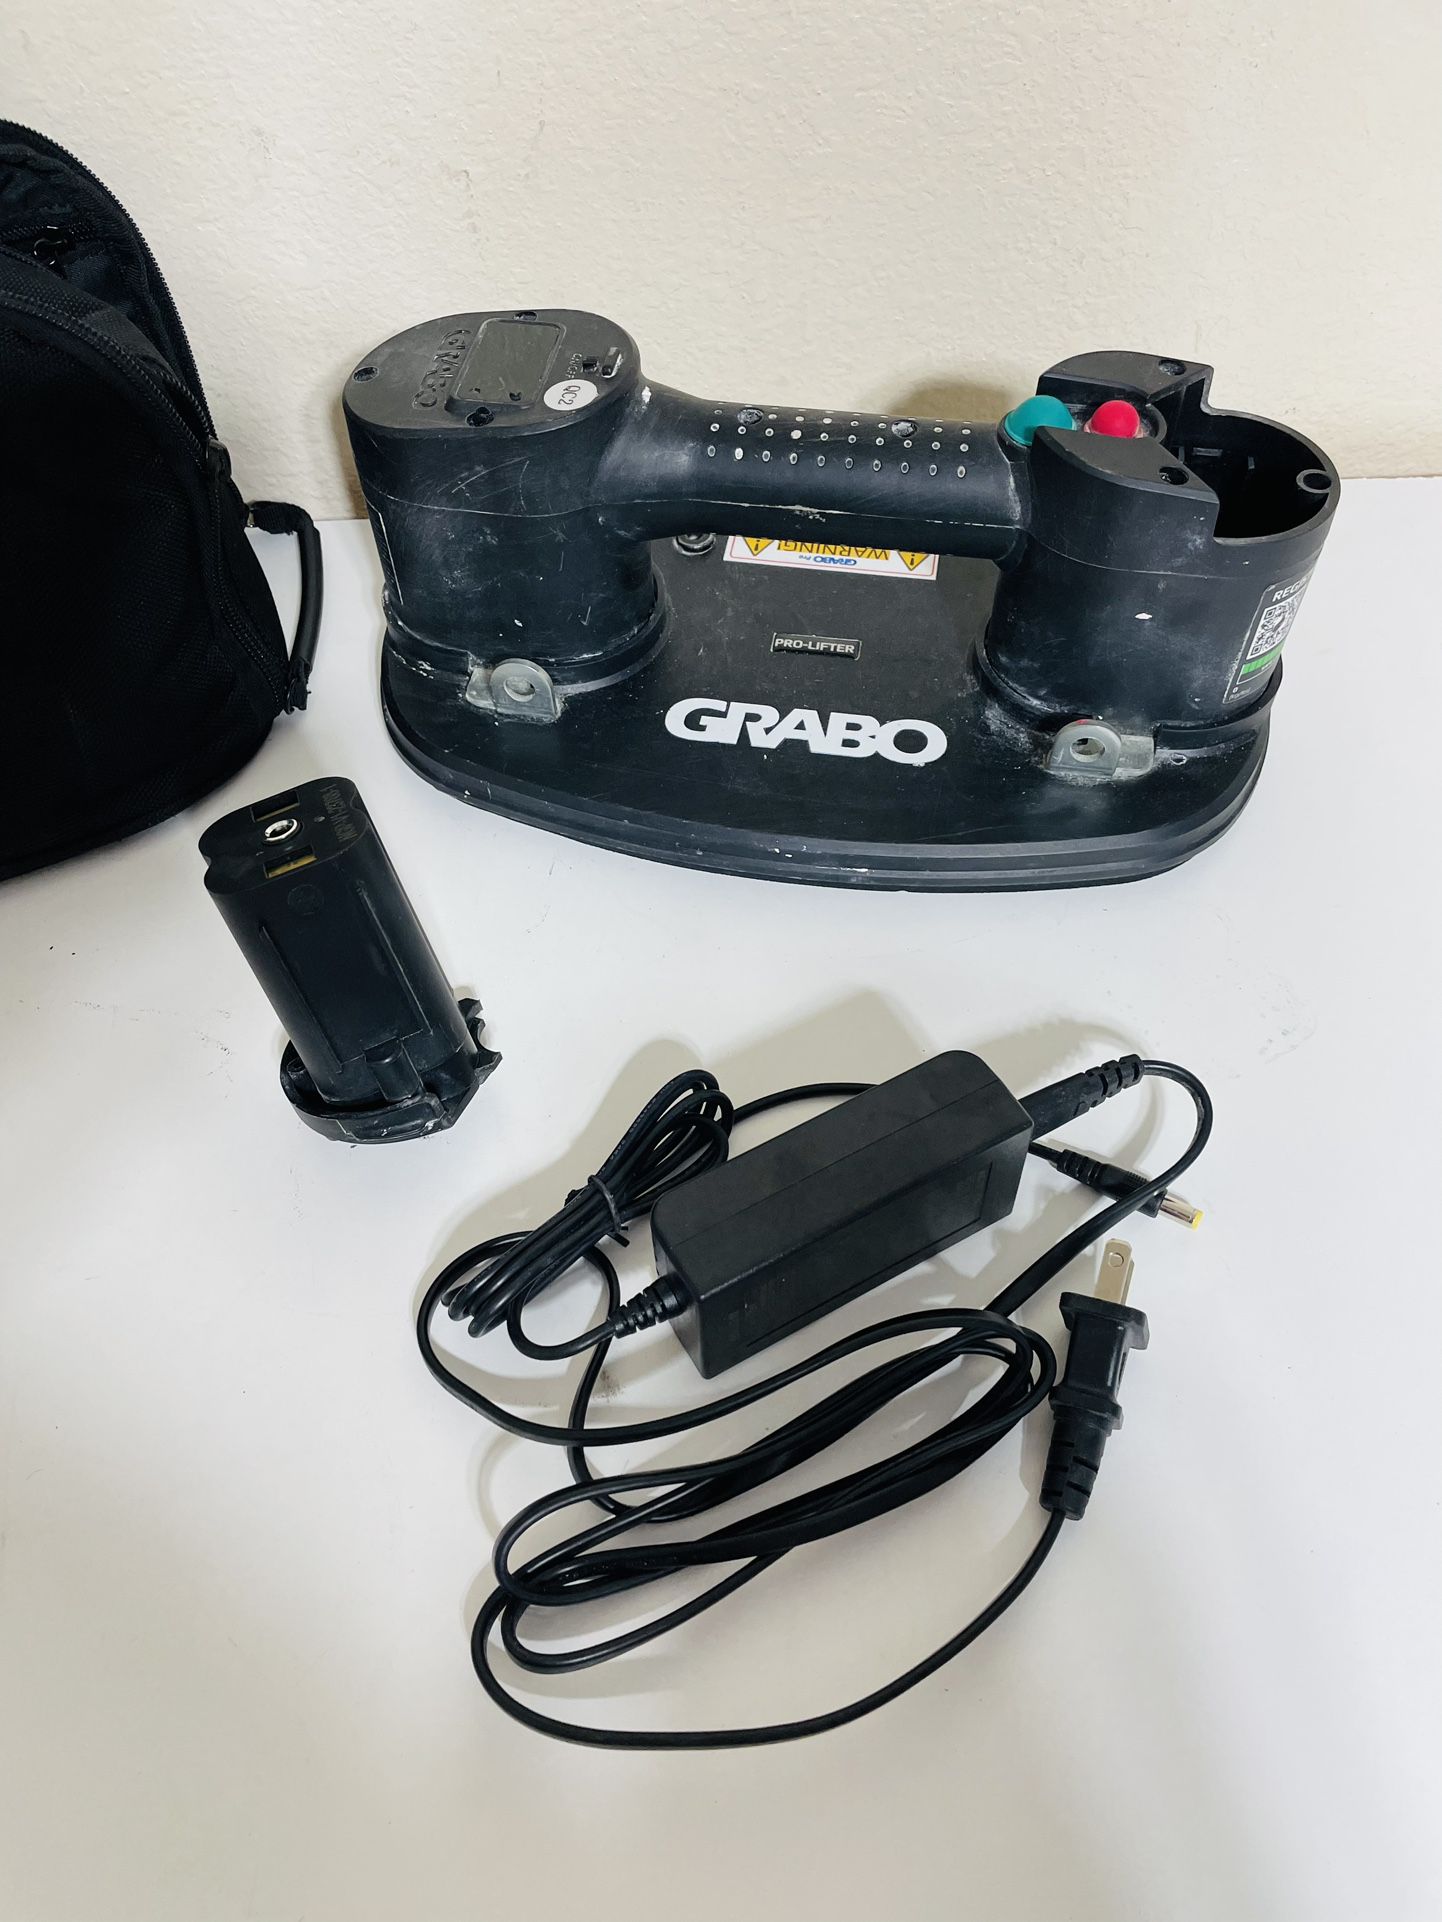  GRABO PRO Lifter 20 Professional Heavy Duty Battery Operated Suction Cup Tool Kit Lifting up to 375 lbs includes Battery, Charger & Carrying Bag